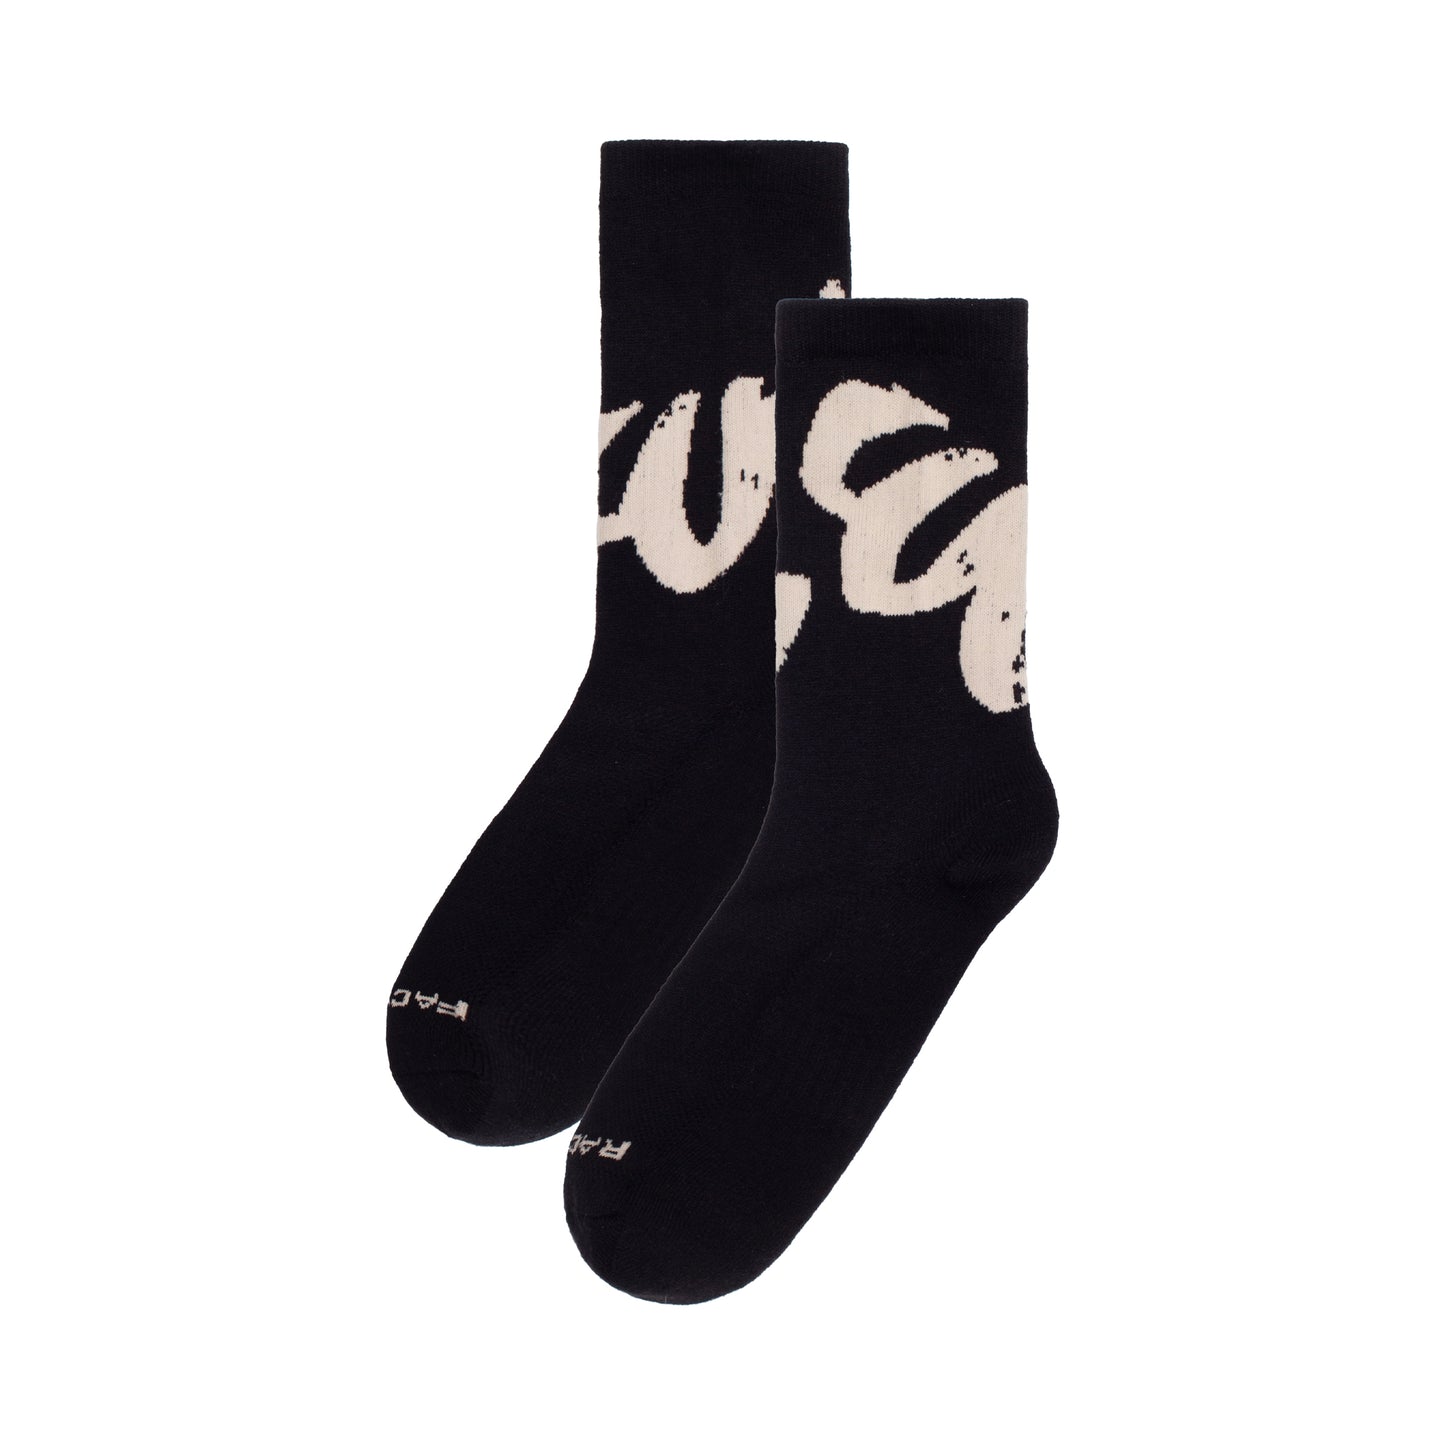 Archaic All-Rounder Sock